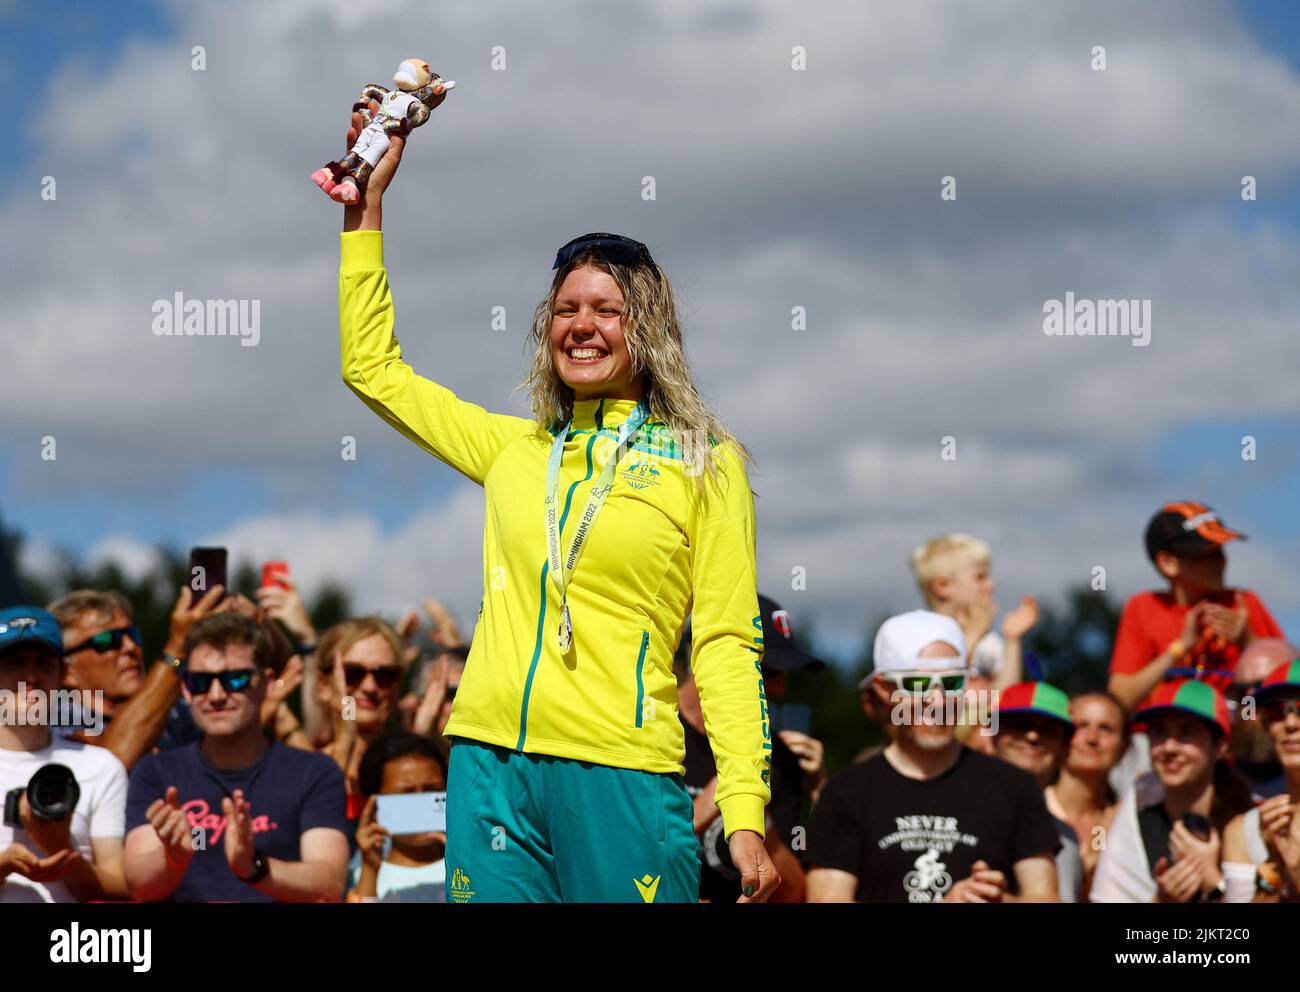 Commonwealth Games - Mountain Bike - Women's Cross-country - Final - Medal Ceremony - Birches Valley, Rugeley, Birmingham, Britain - August 3, 2022 Australia's Zoe Cuthbert celebrates on the podium with the silver medal after finishing second in the Women's Cross-country final REUTERS/Hannah Mckay Stock Photo